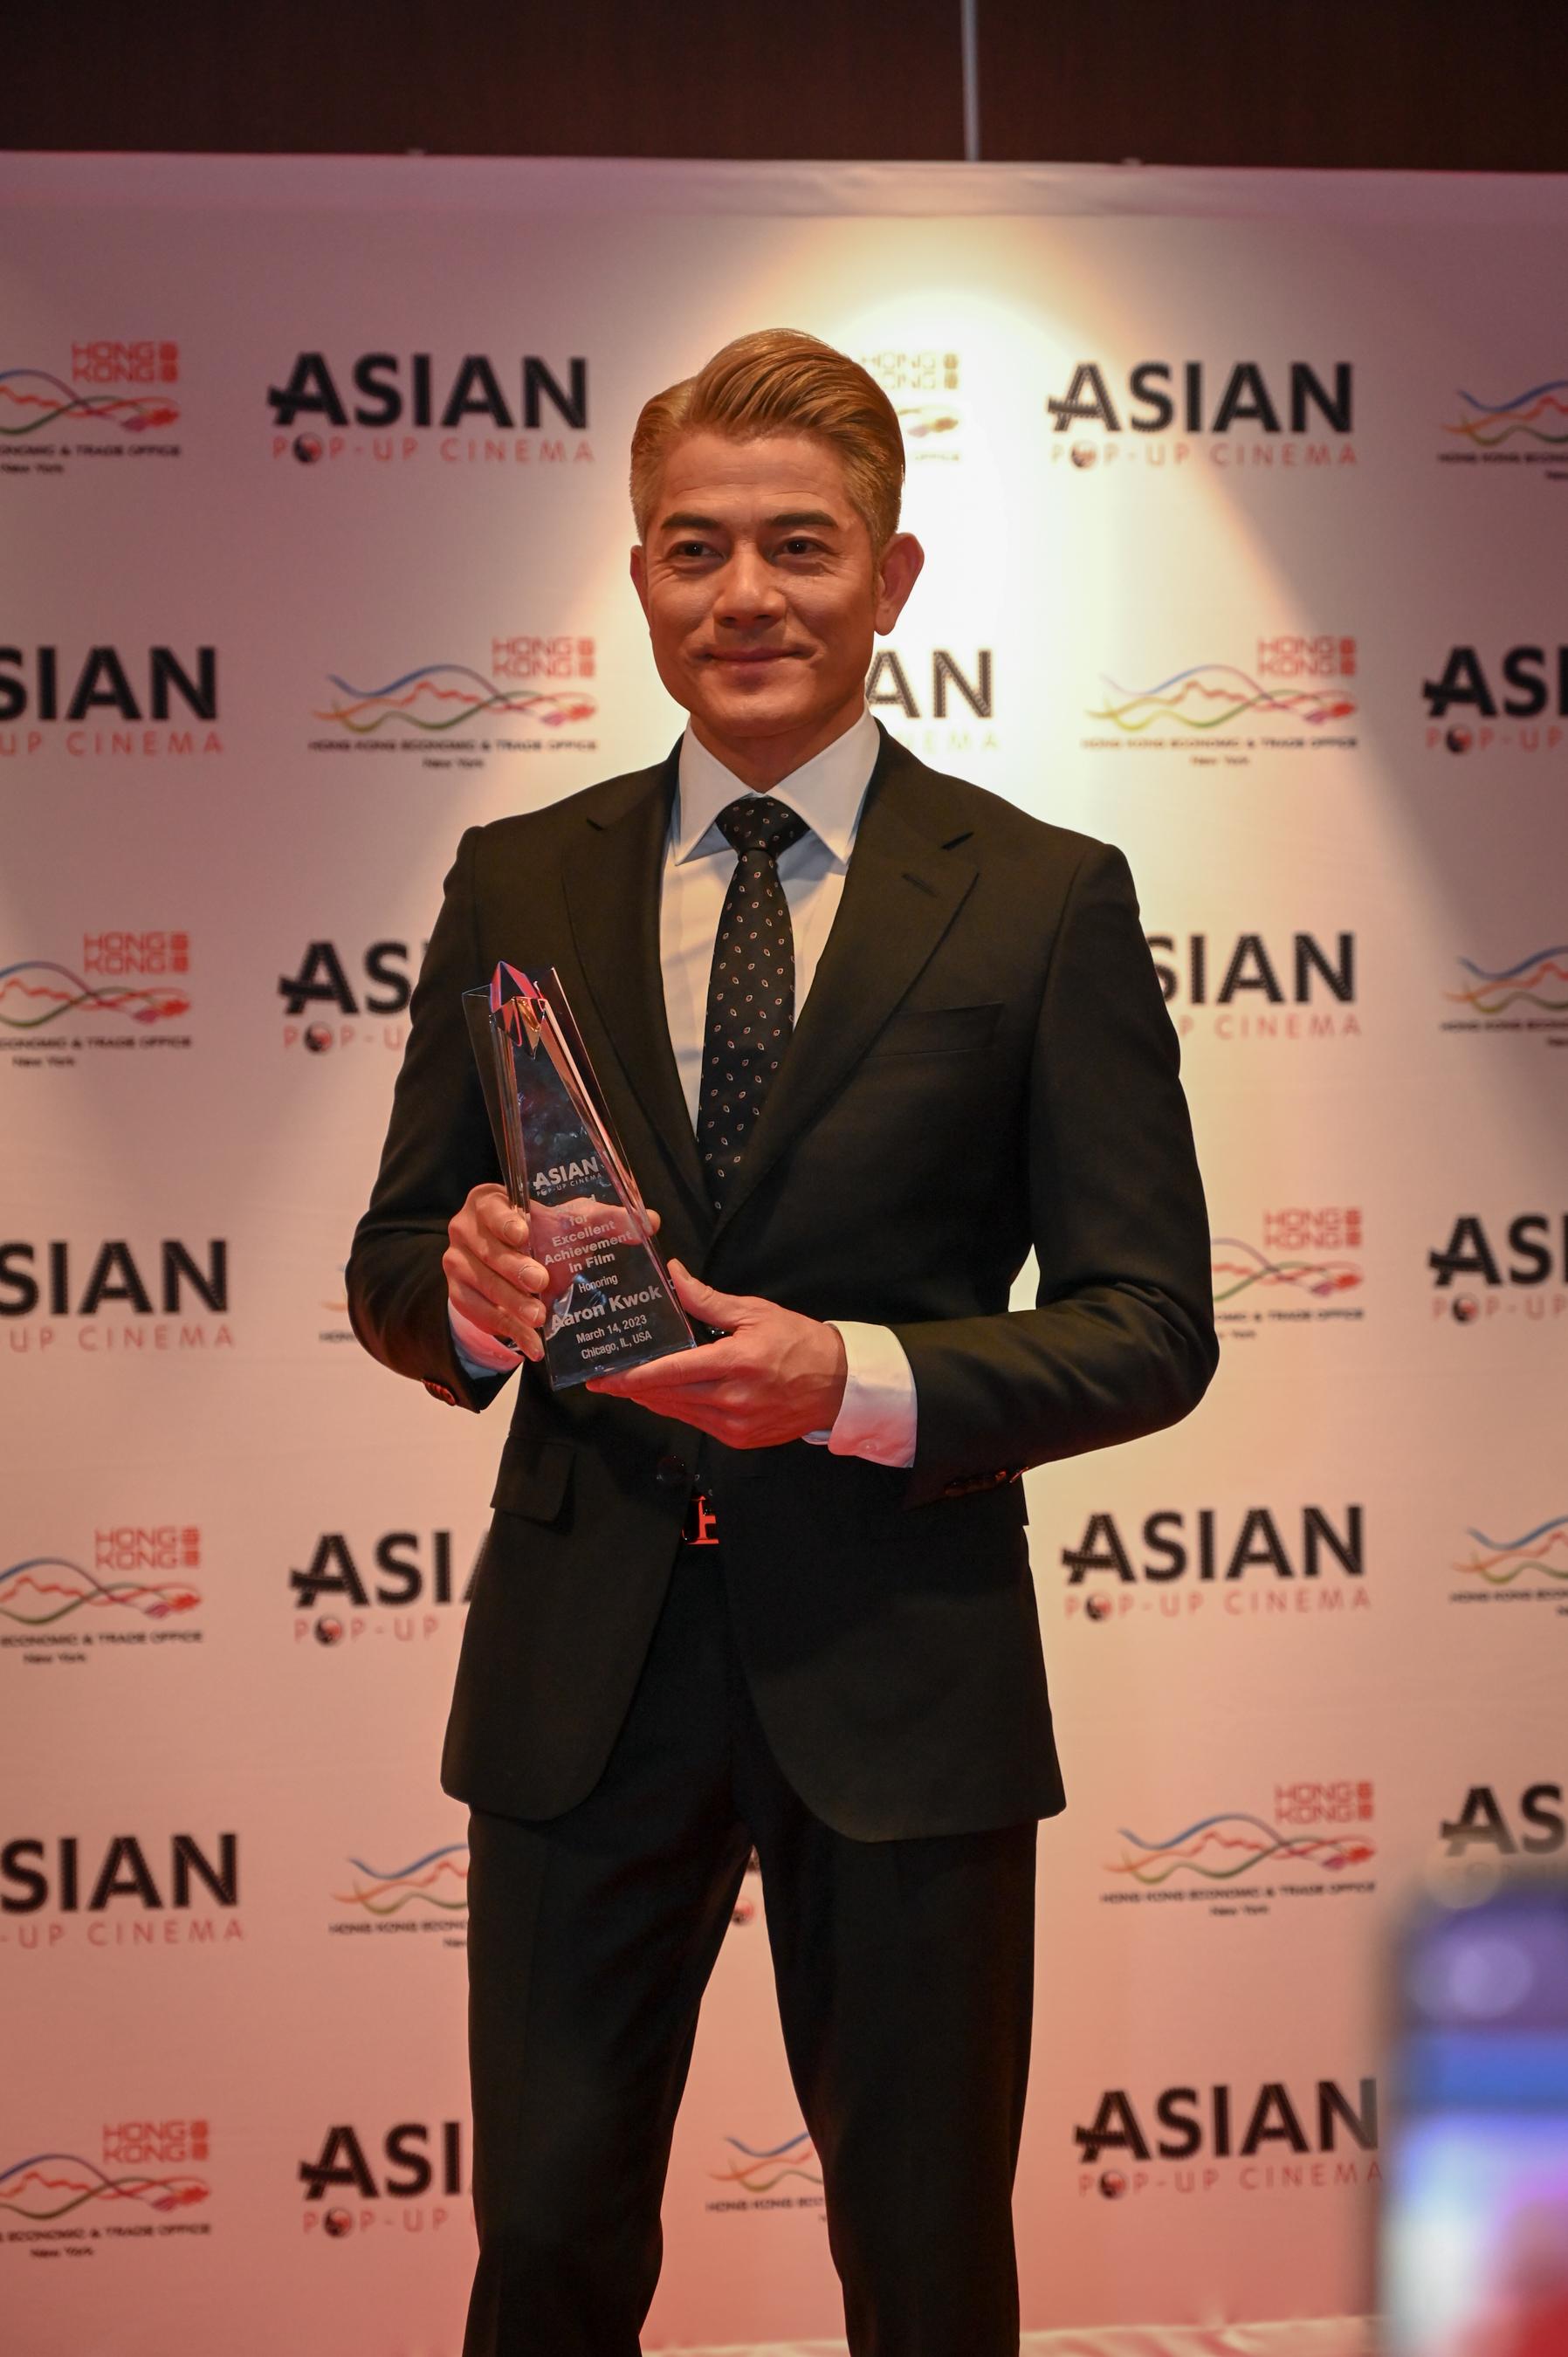 Hong Kong superstar Aaron Kwok was presented with the Award for Excellent Achievement in Film by Chicago's Asian Pop-Up Cinema (APUC) on March 14 (Chicago time) in recognition of his remarkable contribution to the film industry.